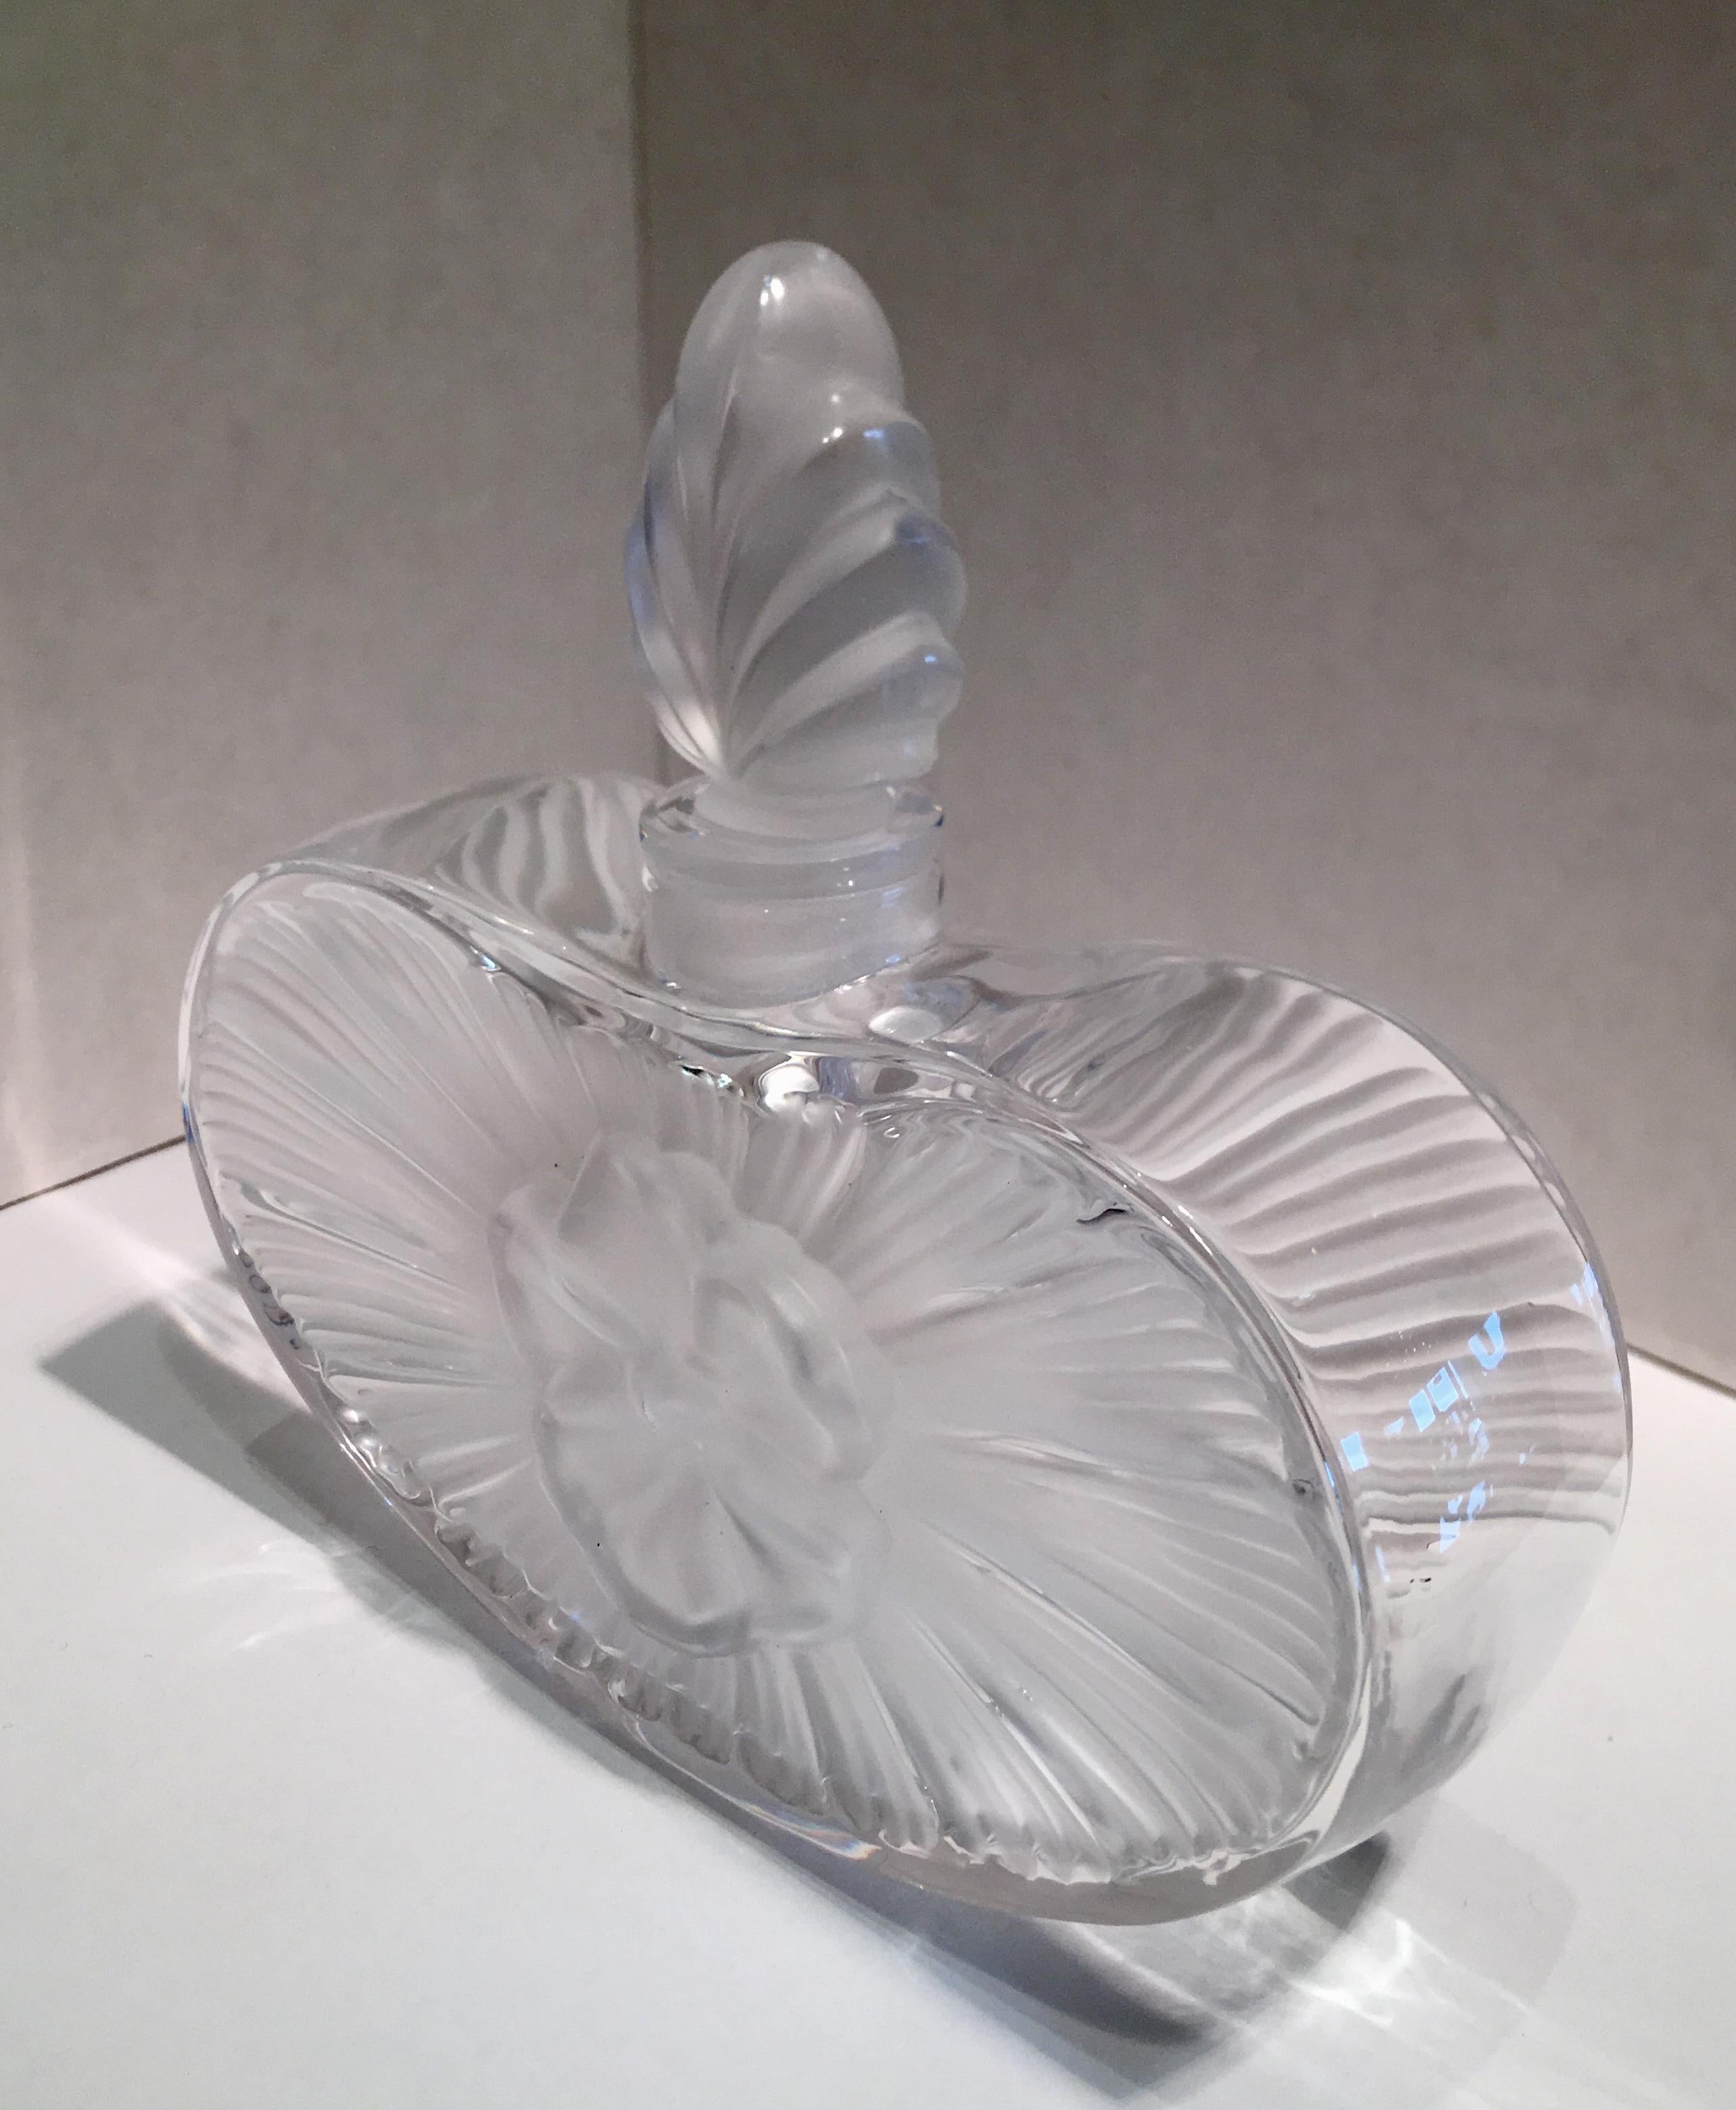 Timelessly elegant, Art Deco style, handcrafted lead crystal perfume bottle by renowned French perfume bottle maker, Lalique, features a pleasing, rounded heart shape bottle with a three dimensional pansy flower in the centre on both sides. Bottle